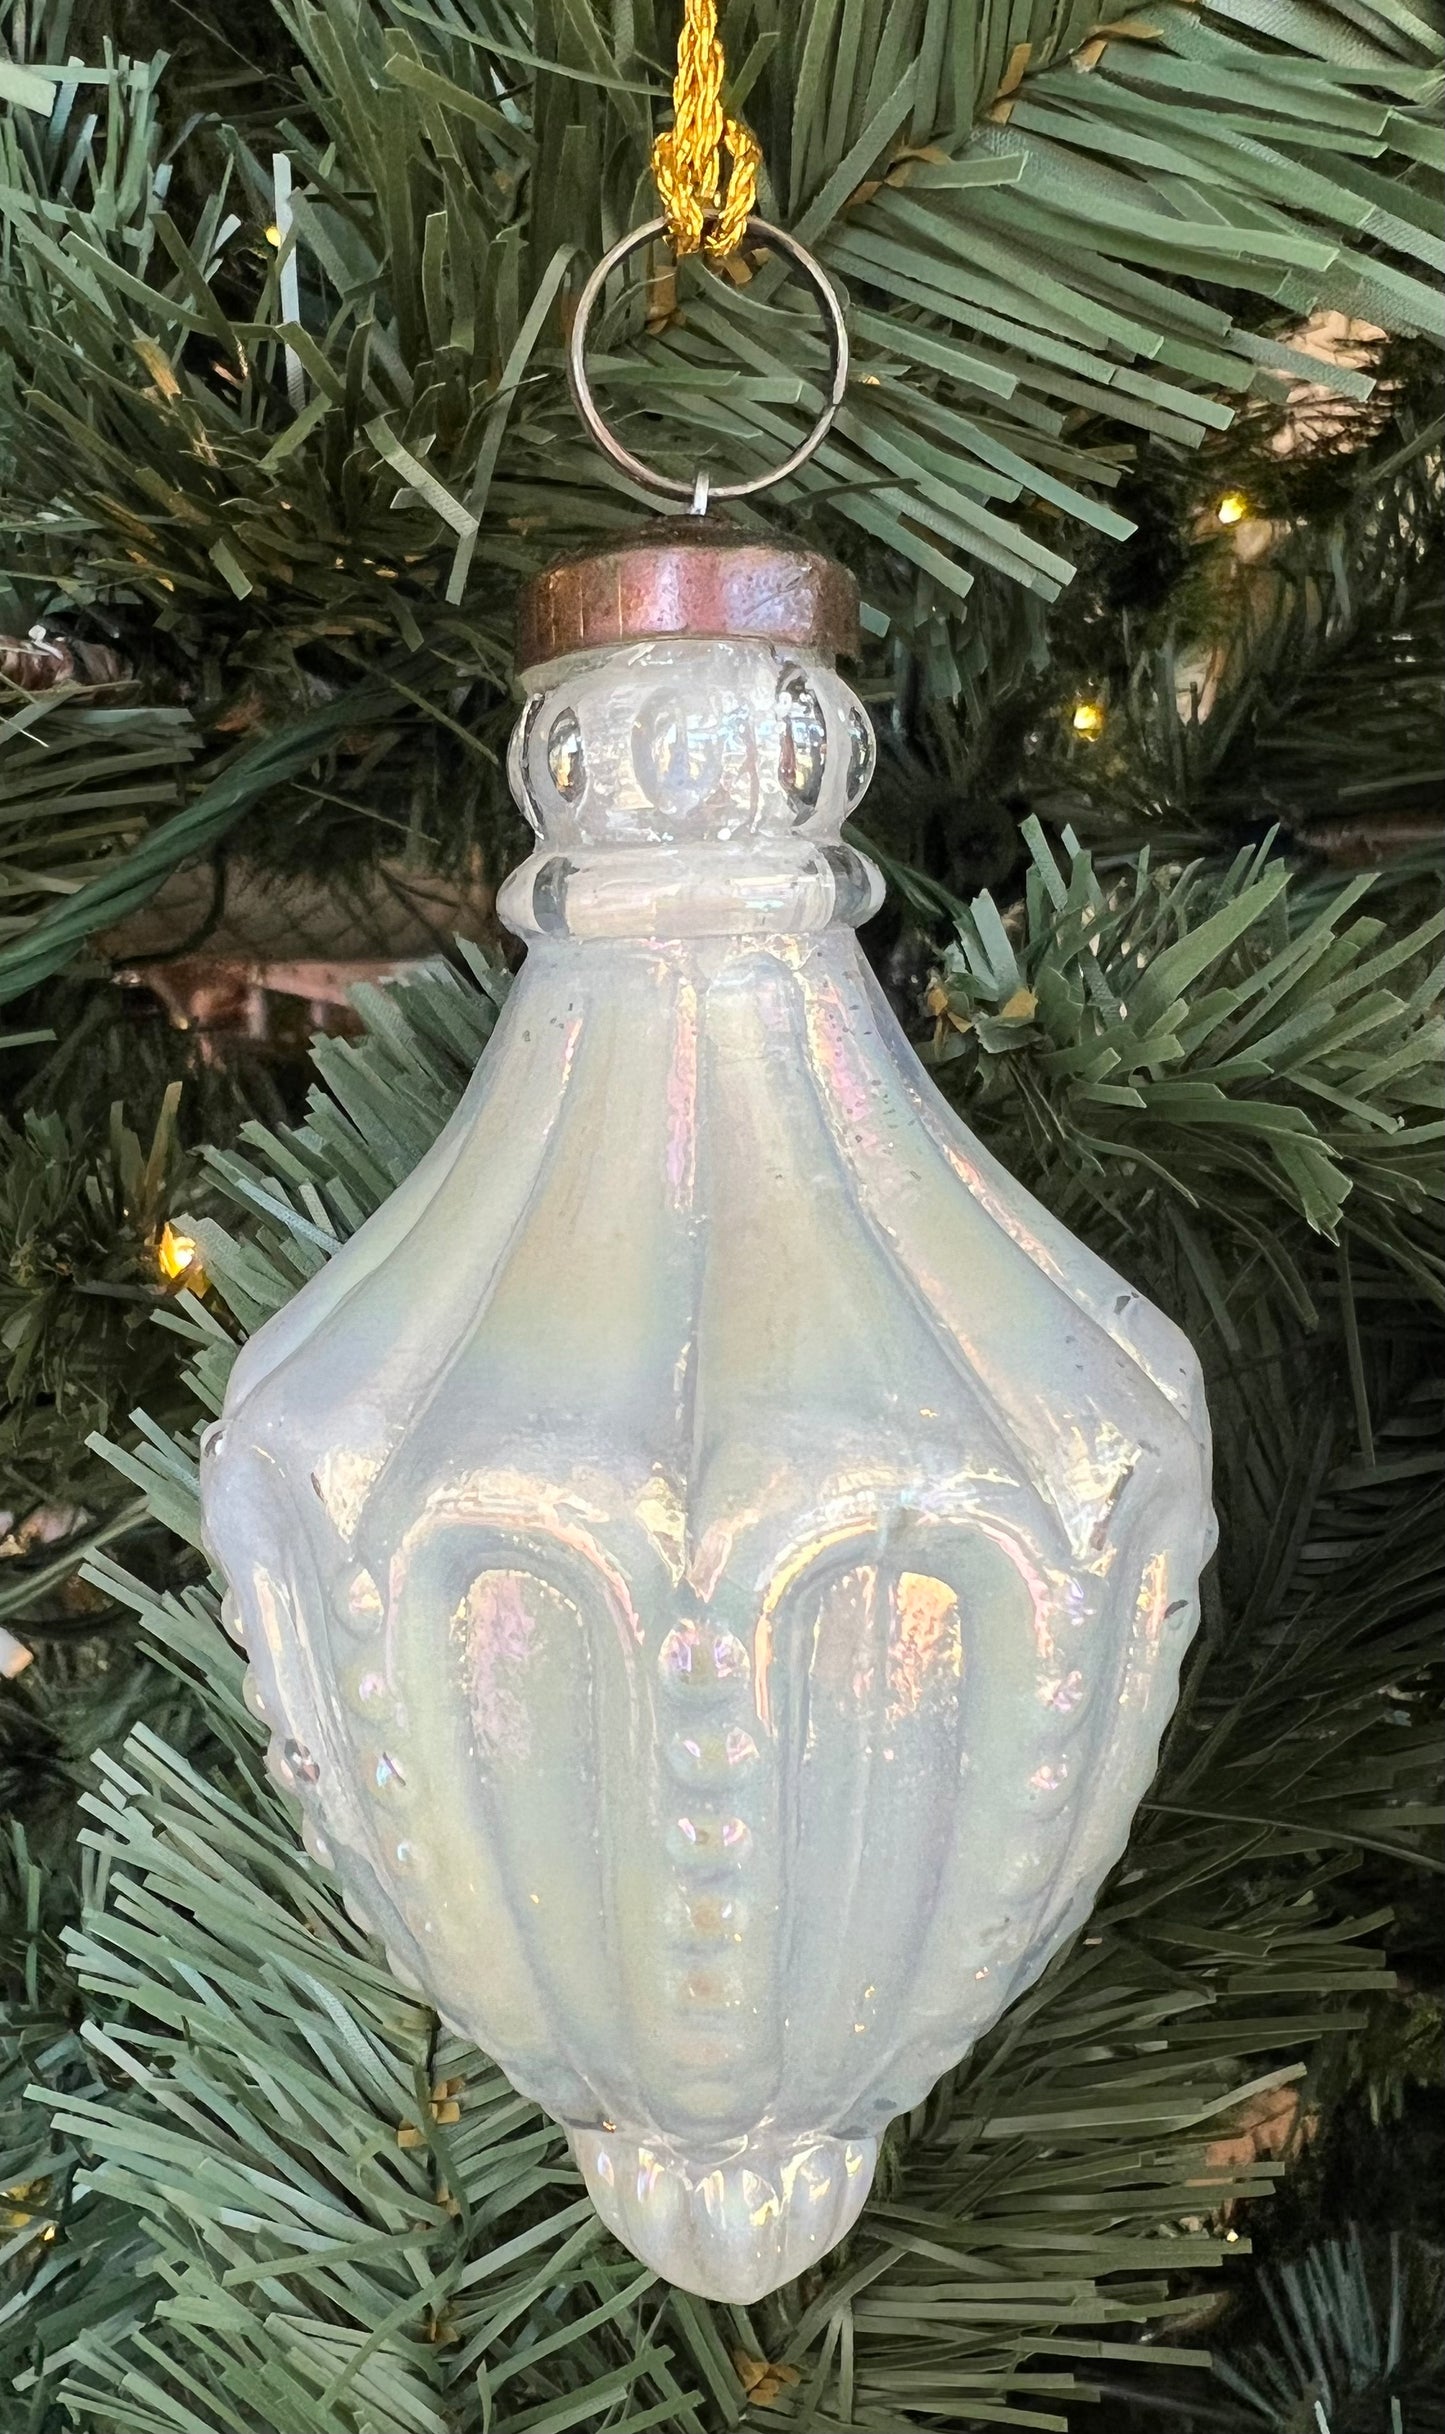 White Shimmery Glass Finial Ornament